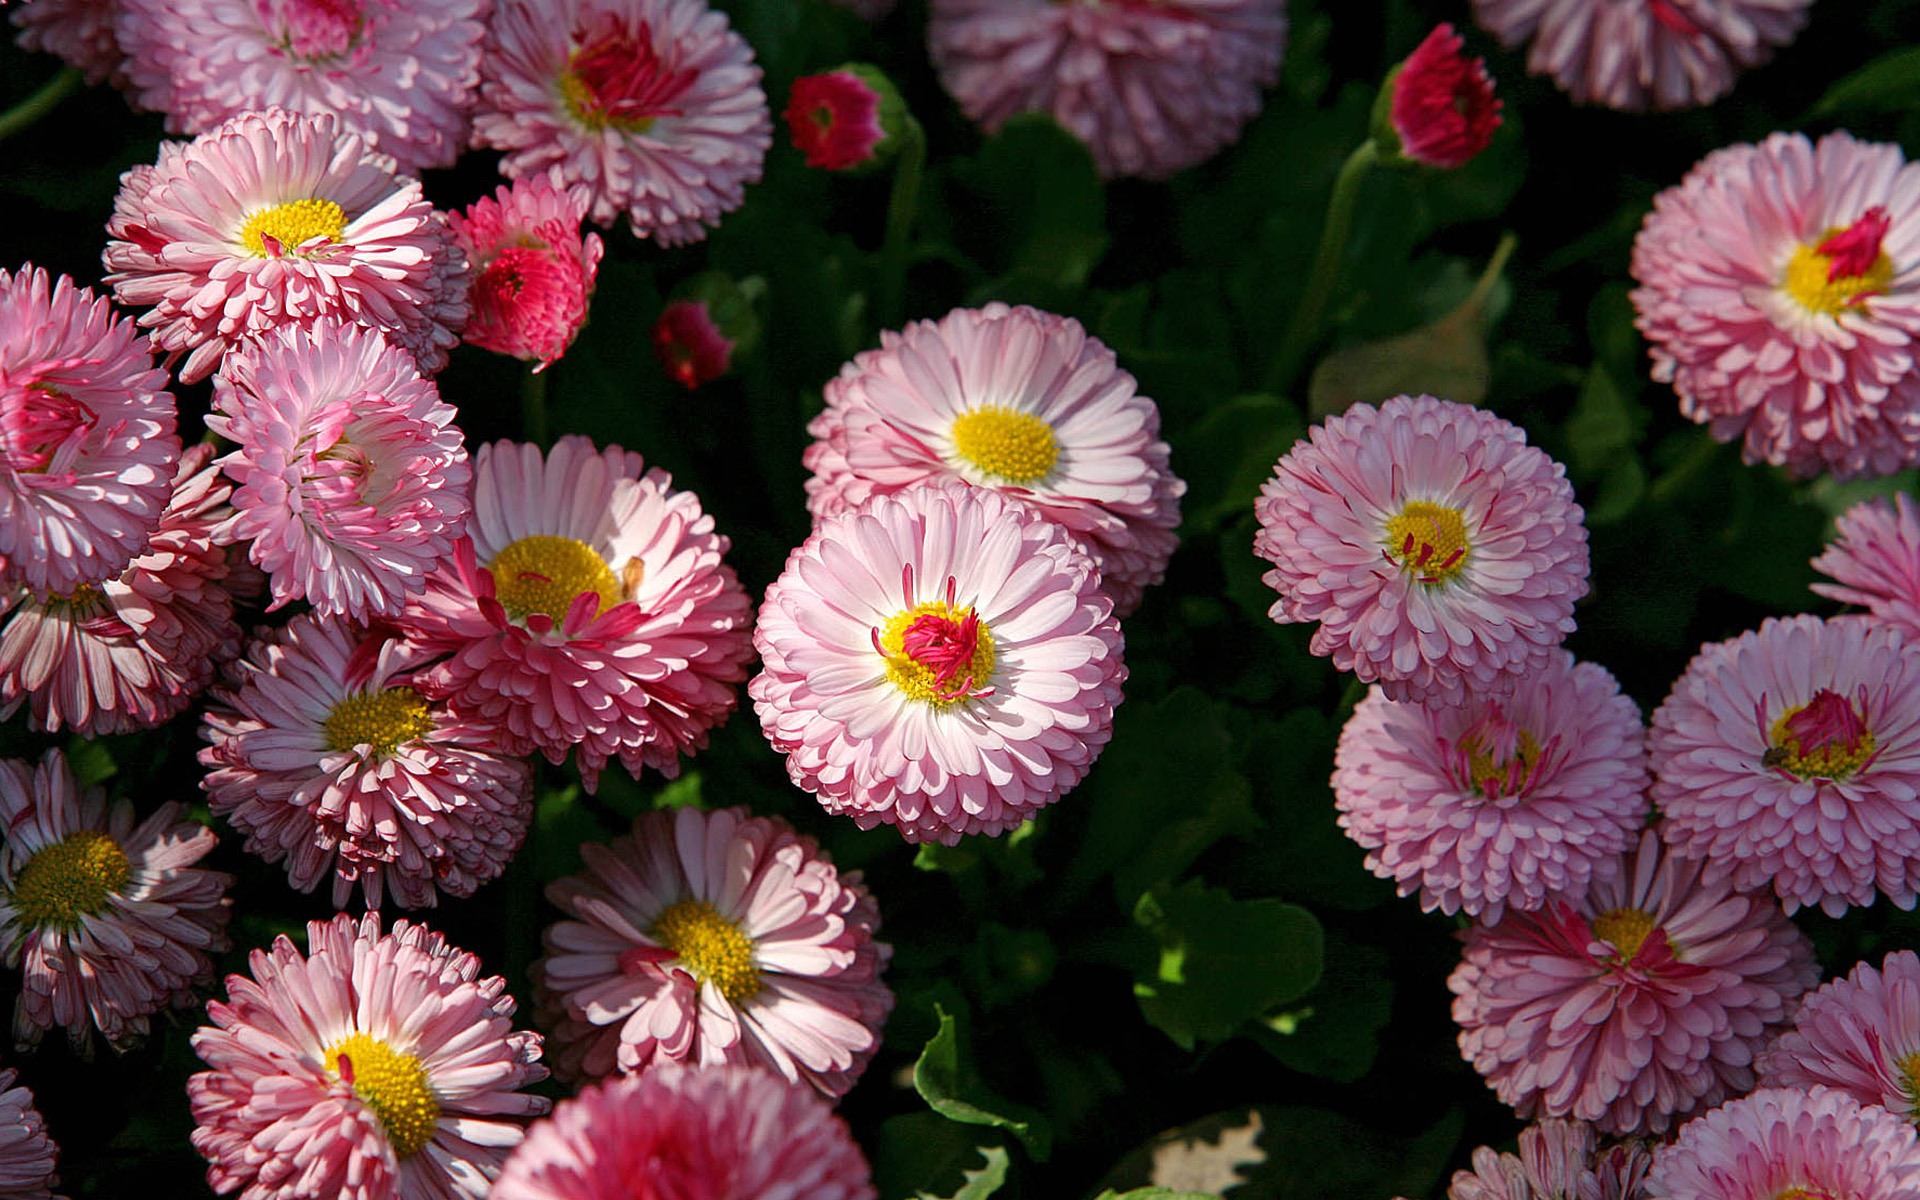 Daisies flowers close-up HD wallpapers #16 - 1920x1200